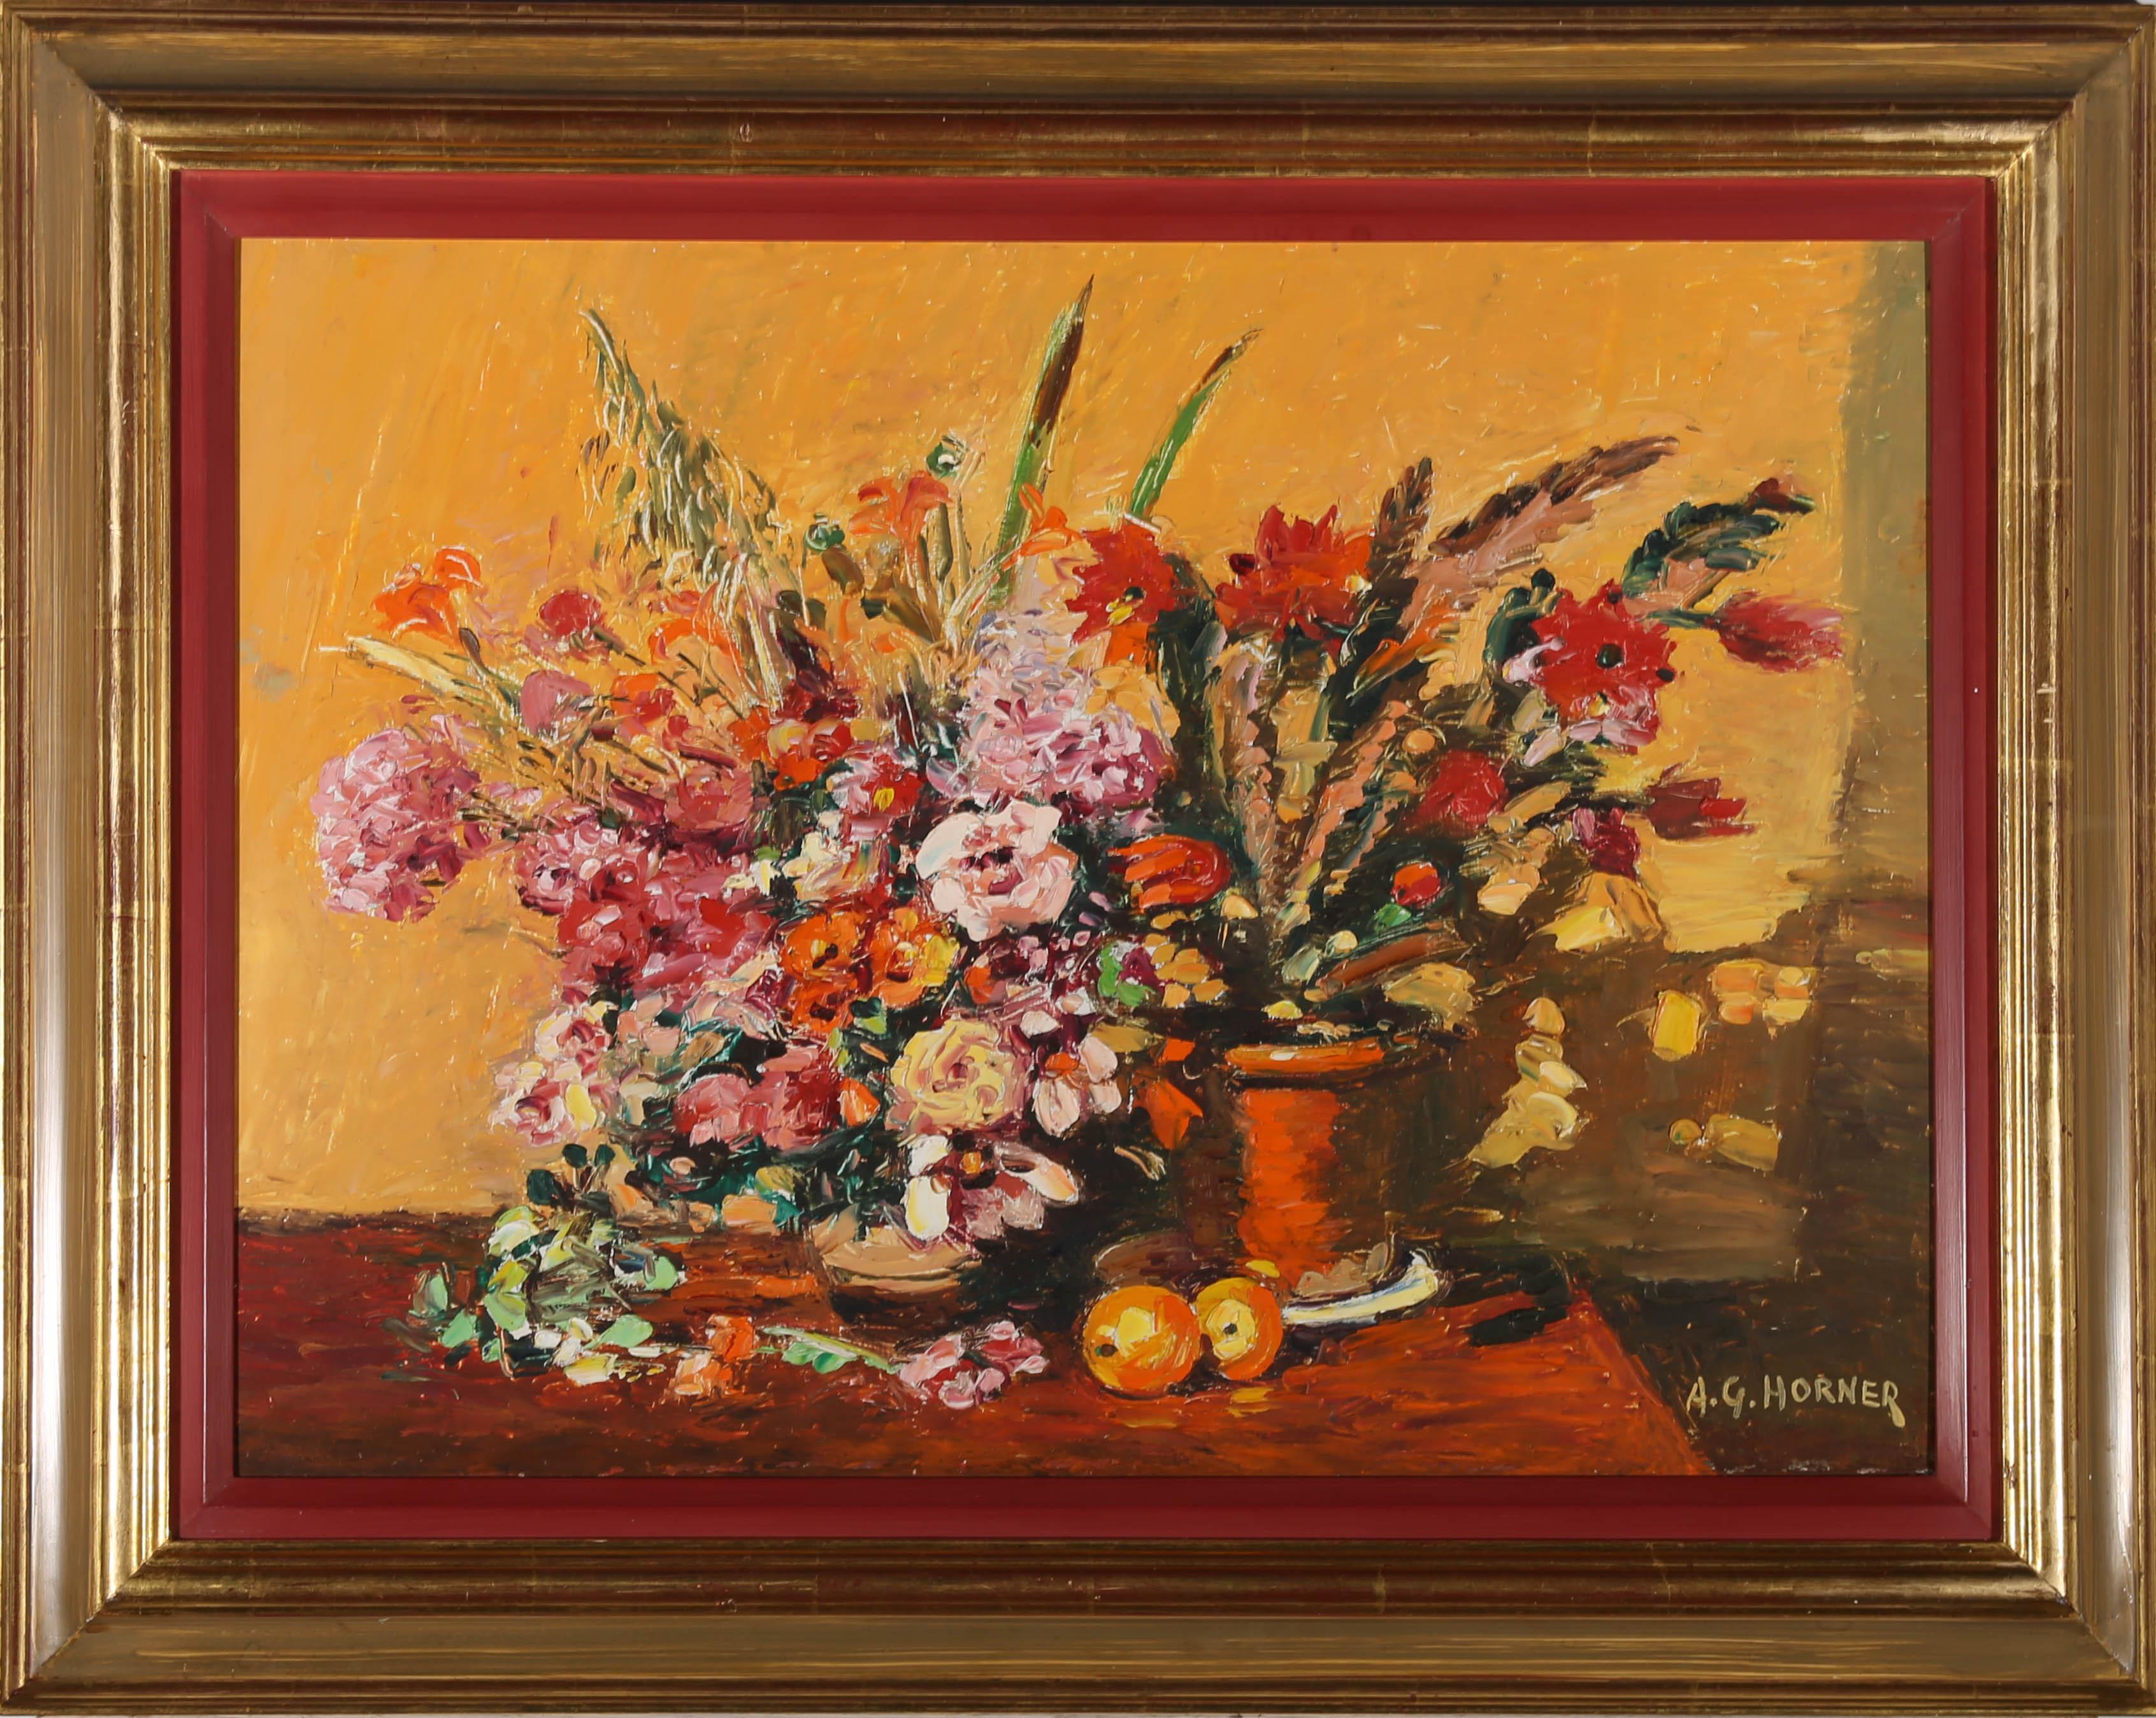 This bold still life study incorporates vibrant colours and an expressive style to depict two puts of summer blooms. Signed to the lower right. Presented in a gilt frame with a red painted gilt slip. On board.
